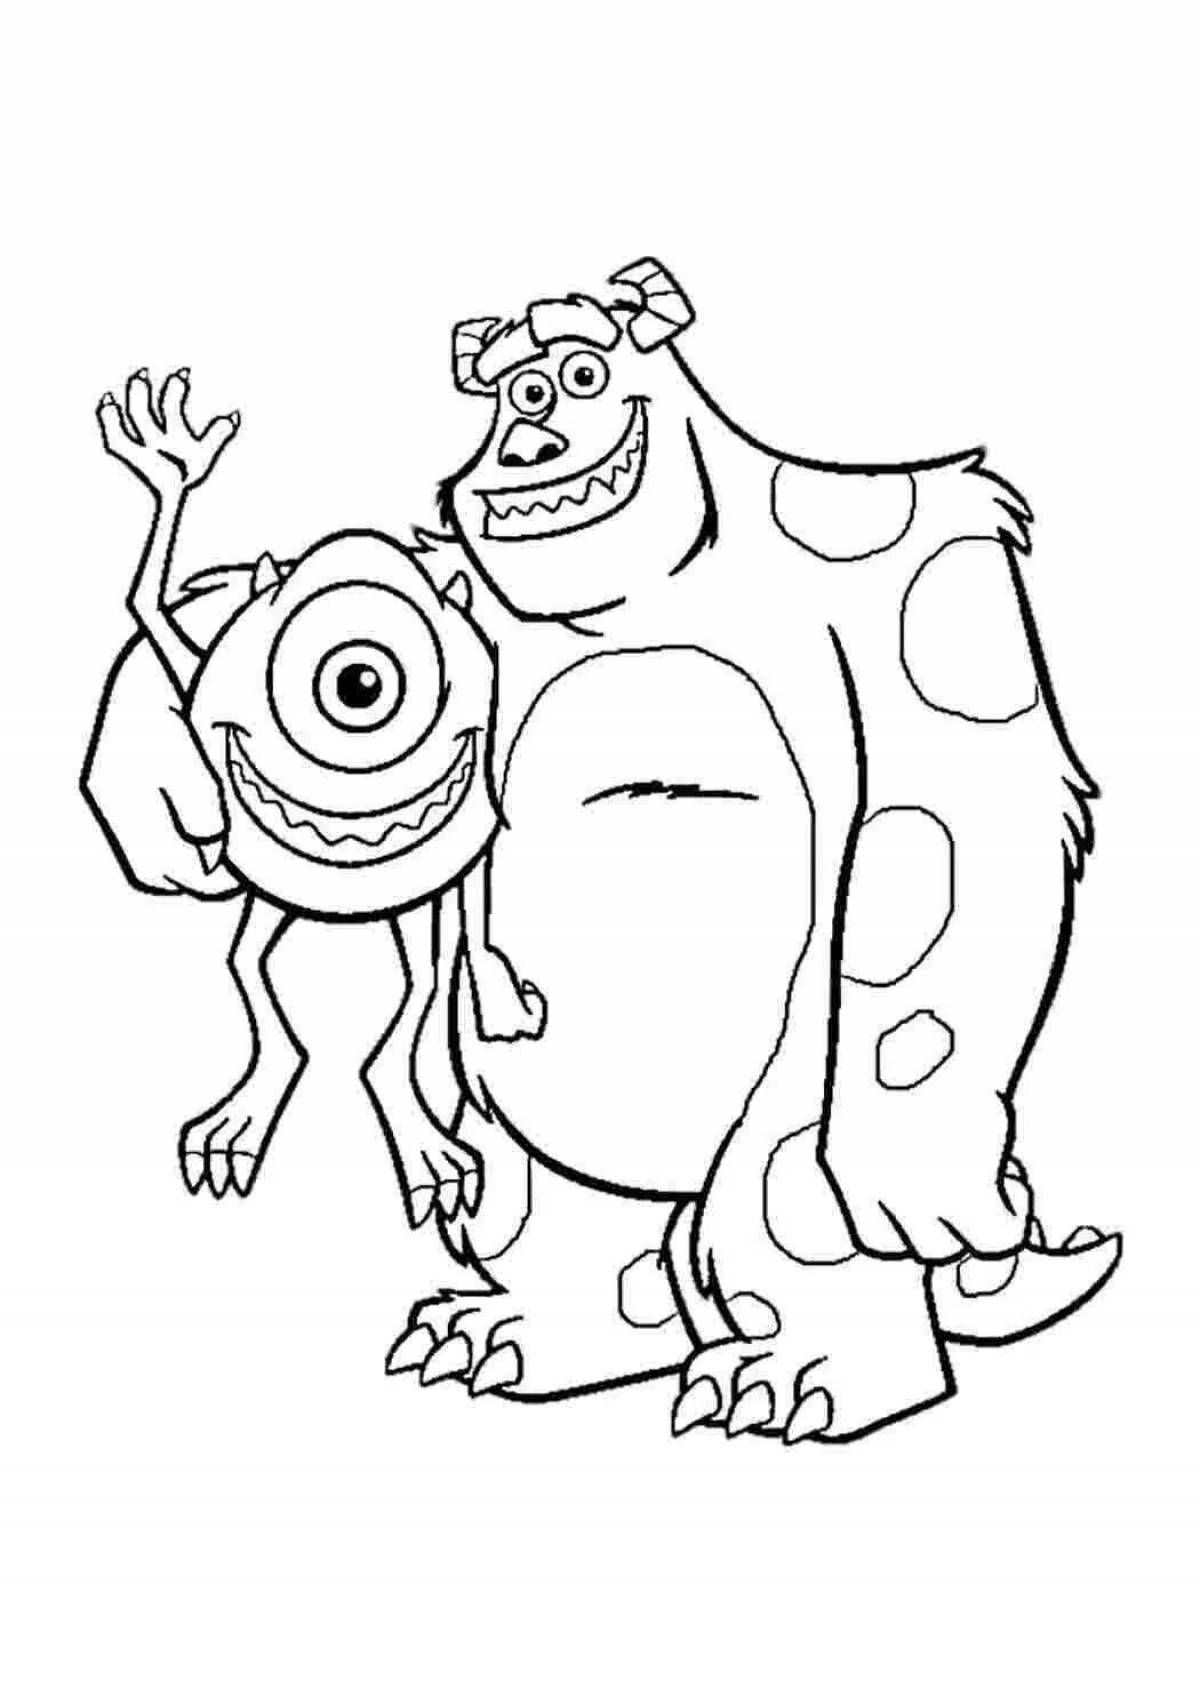 Exciting sally and boo coloring page